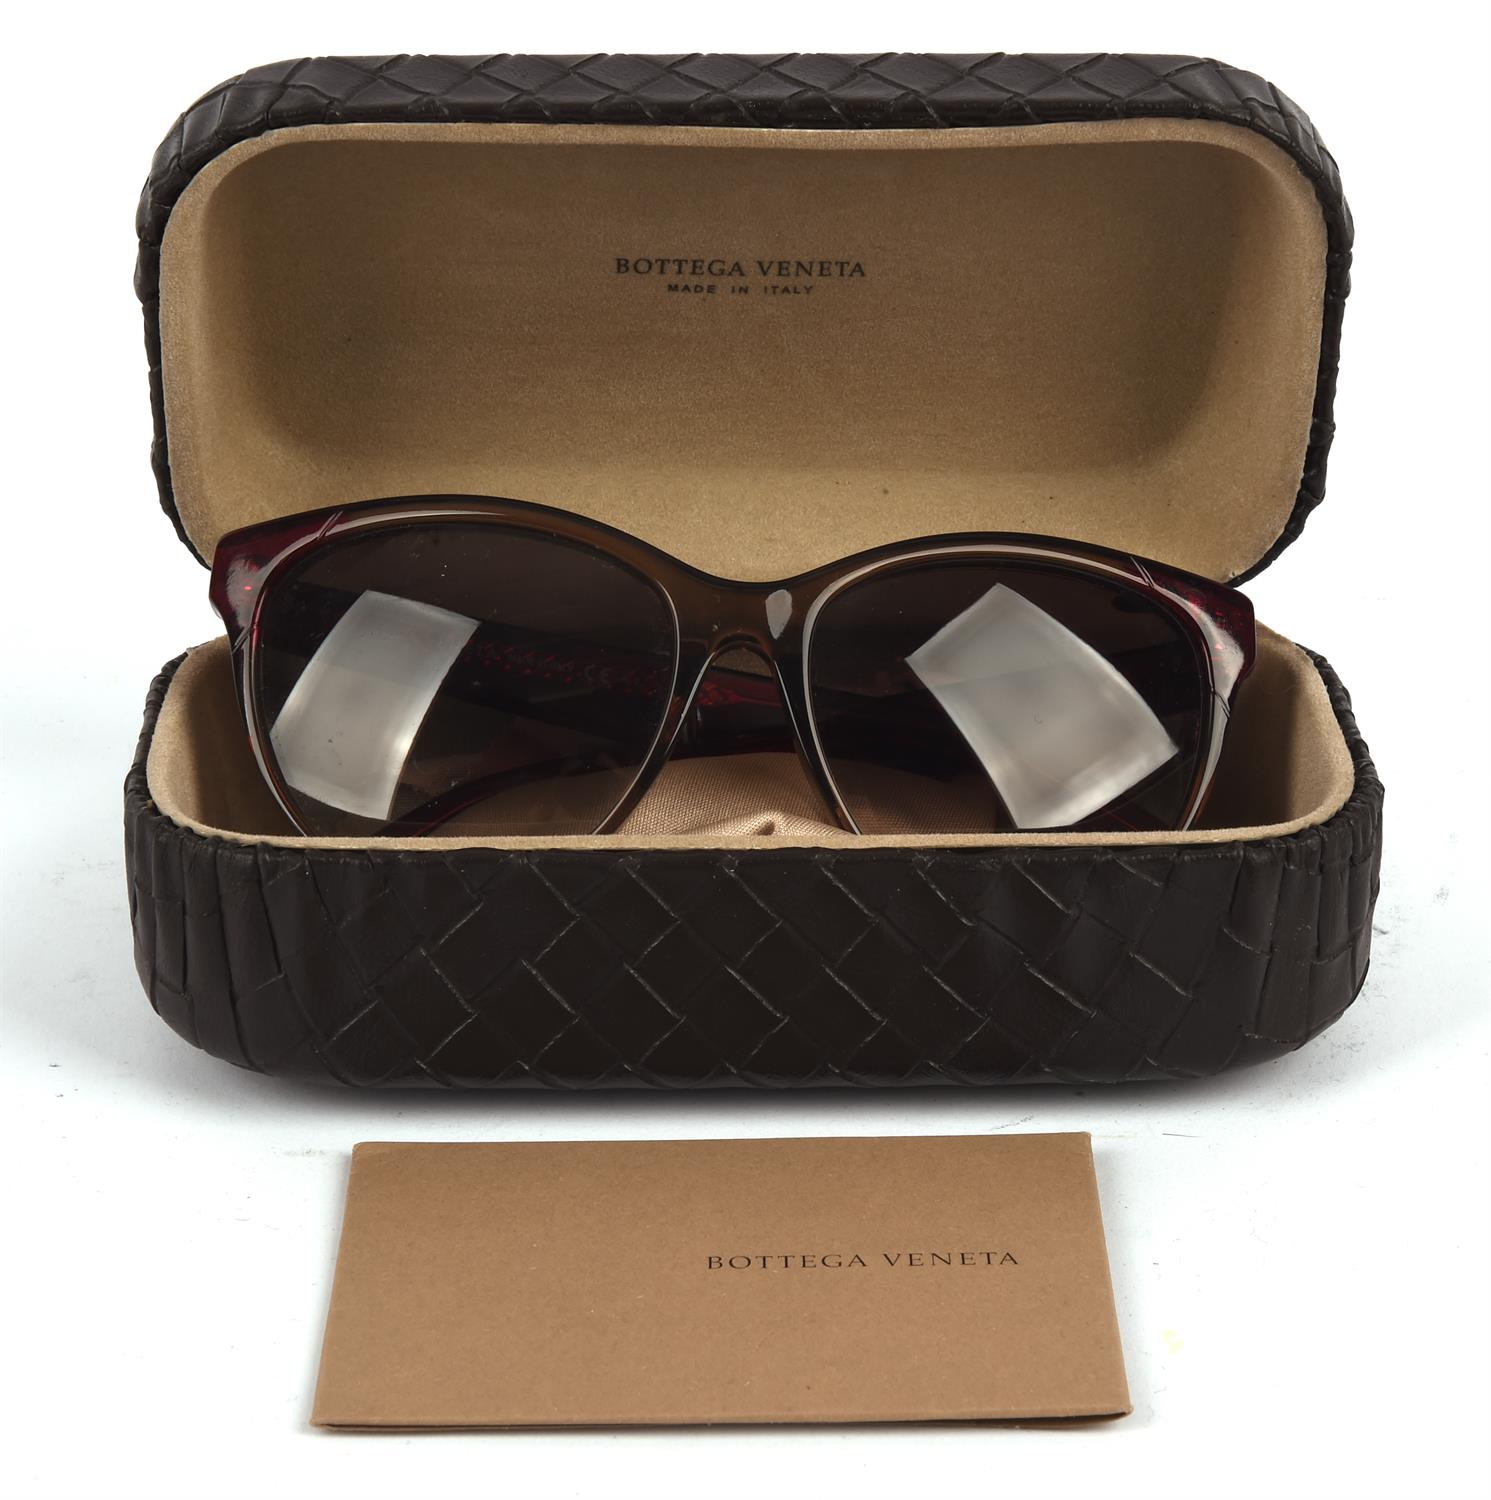 BOTTEGA VENETA ladies vintage 1990s sunglasses in leather case with cards and cloths - Image 4 of 4